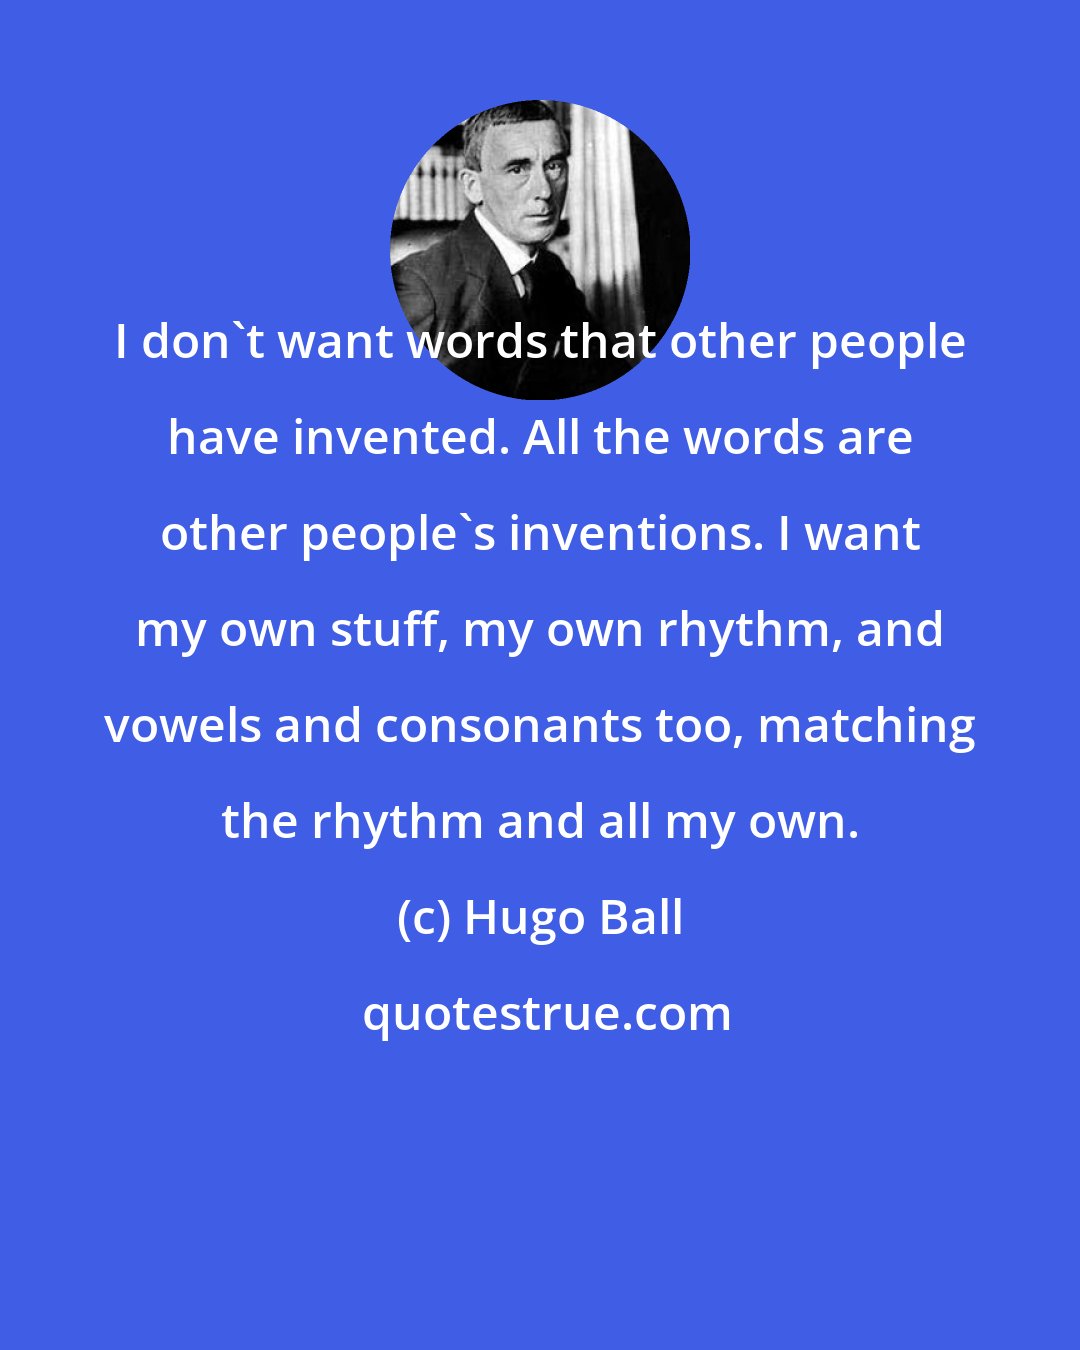 Hugo Ball: I don't want words that other people have invented. All the words are other people's inventions. I want my own stuff, my own rhythm, and vowels and consonants too, matching the rhythm and all my own.